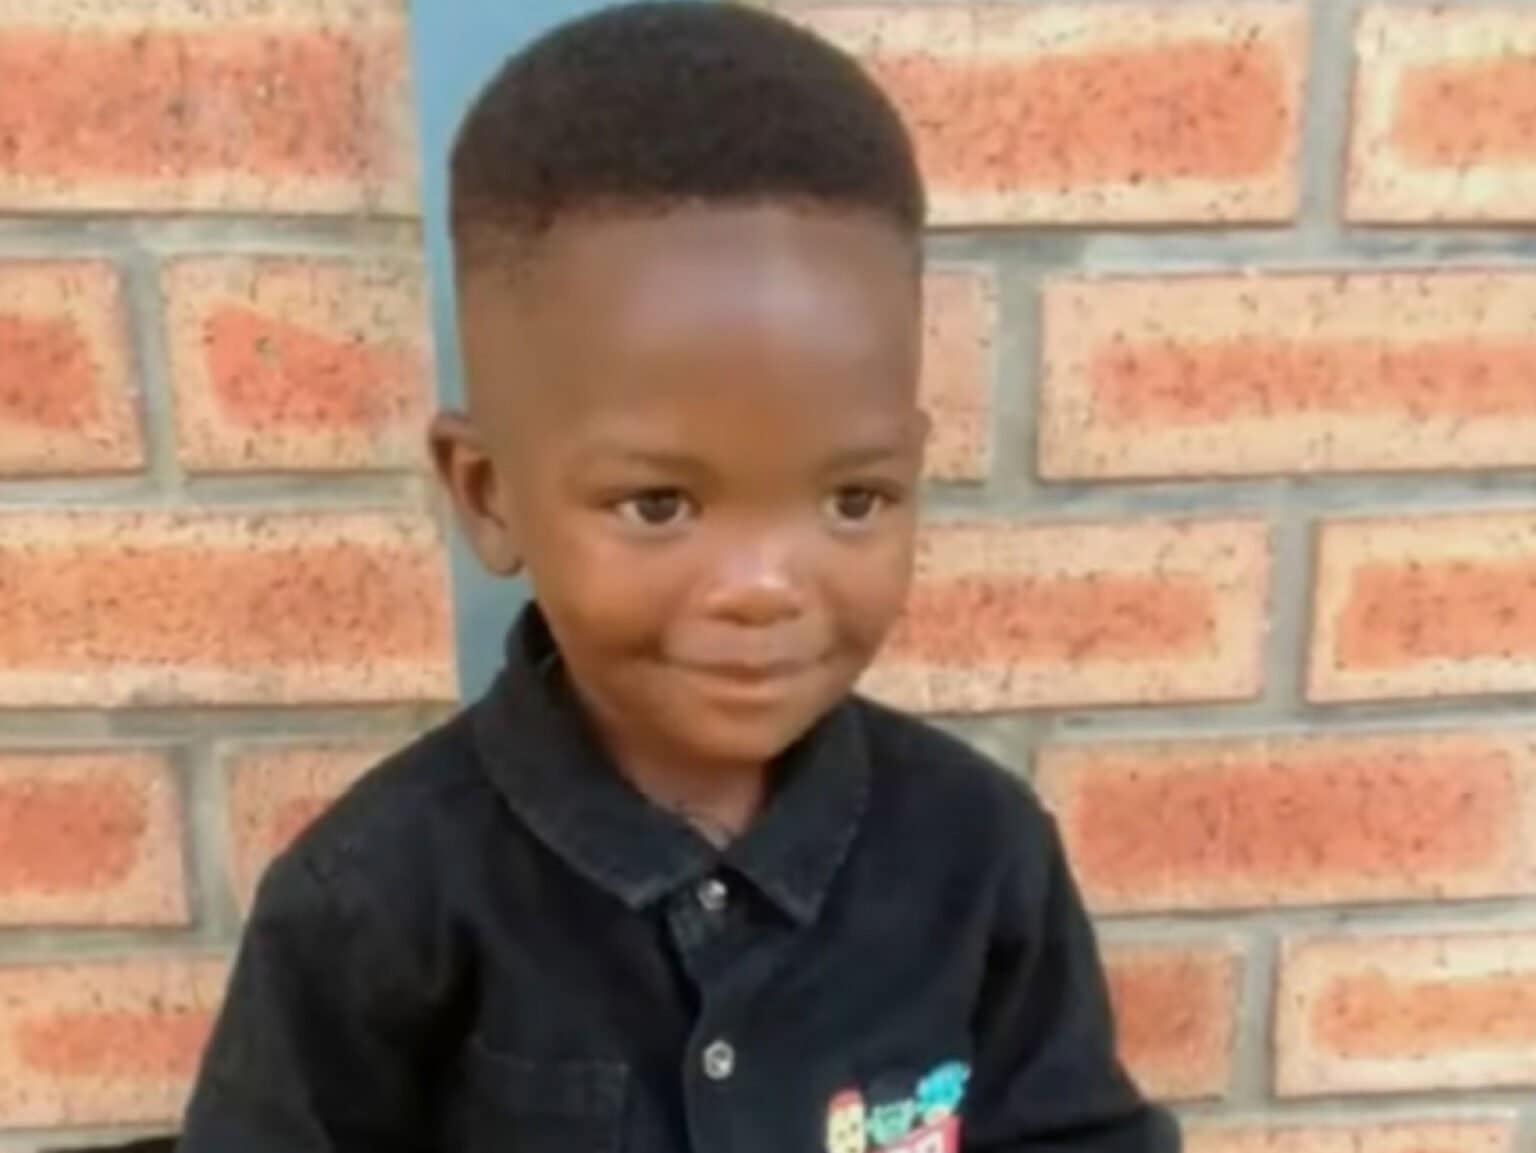 South African man arrested for murder after he kidnapped and hung his girlfriend’s 3-year-old son from tree on Father’s Day